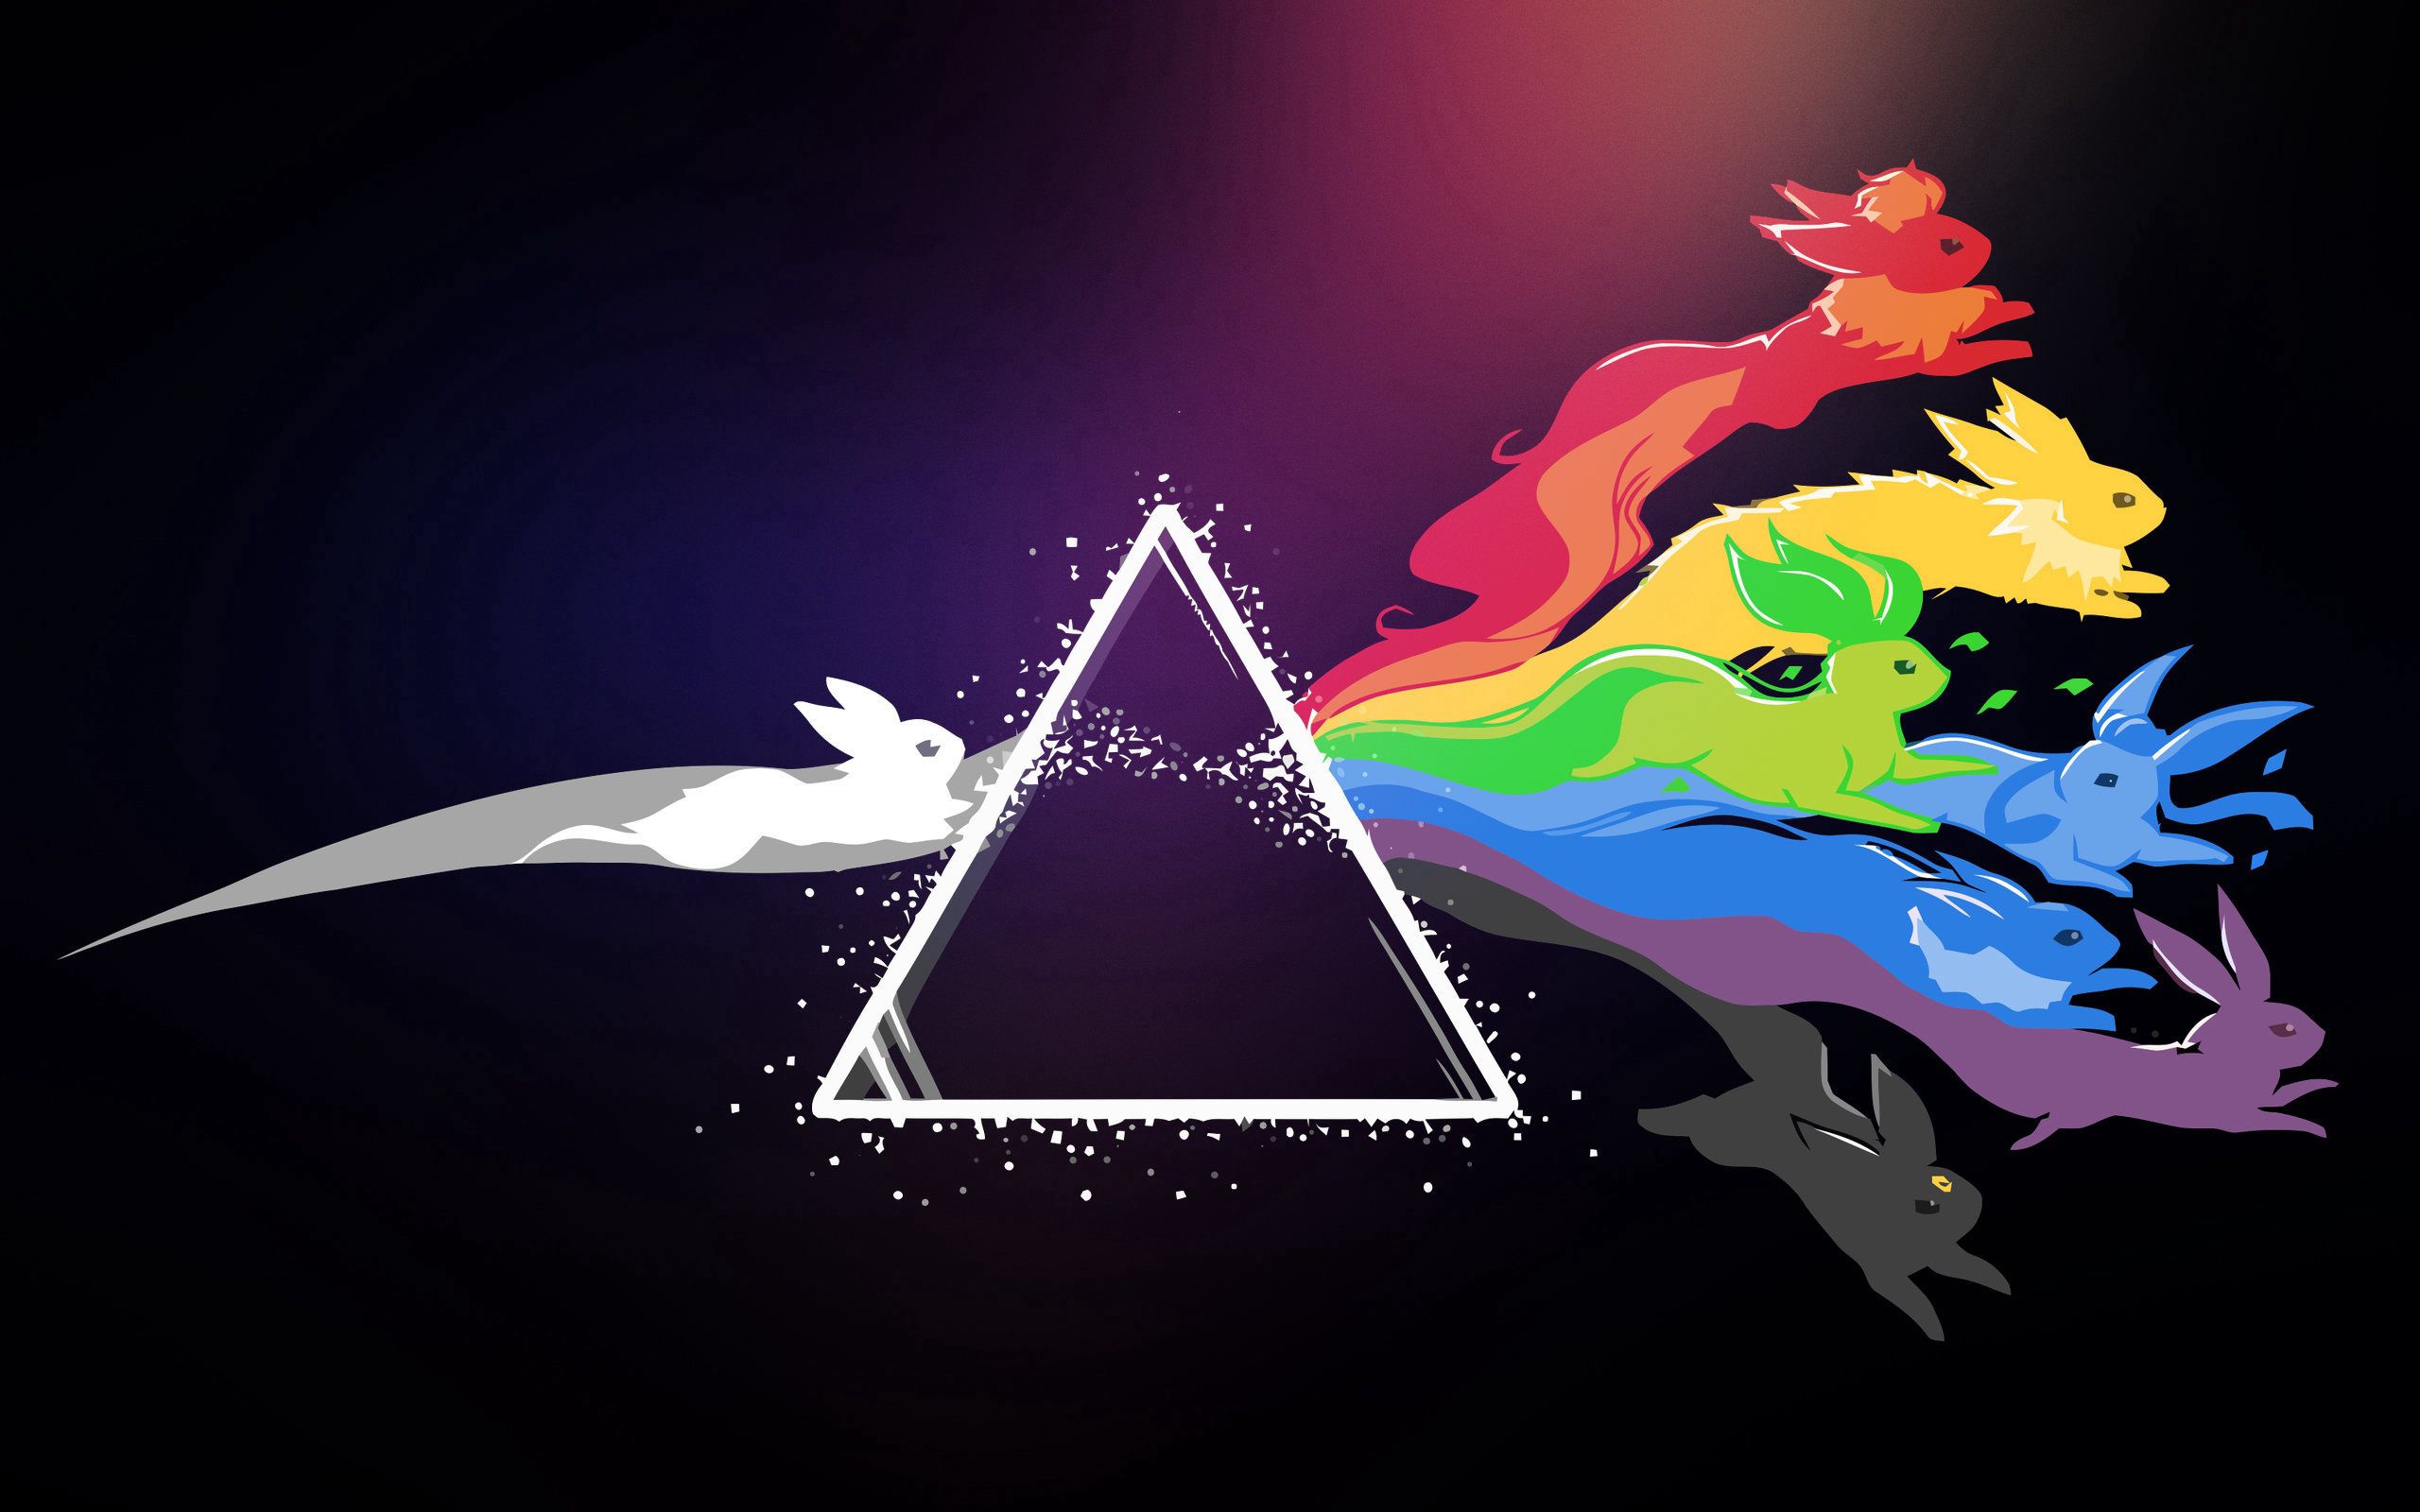 103603 download wallpaper pokemon, pokémon, pink floyd, art, bright, logo, logotype screensavers and pictures for free